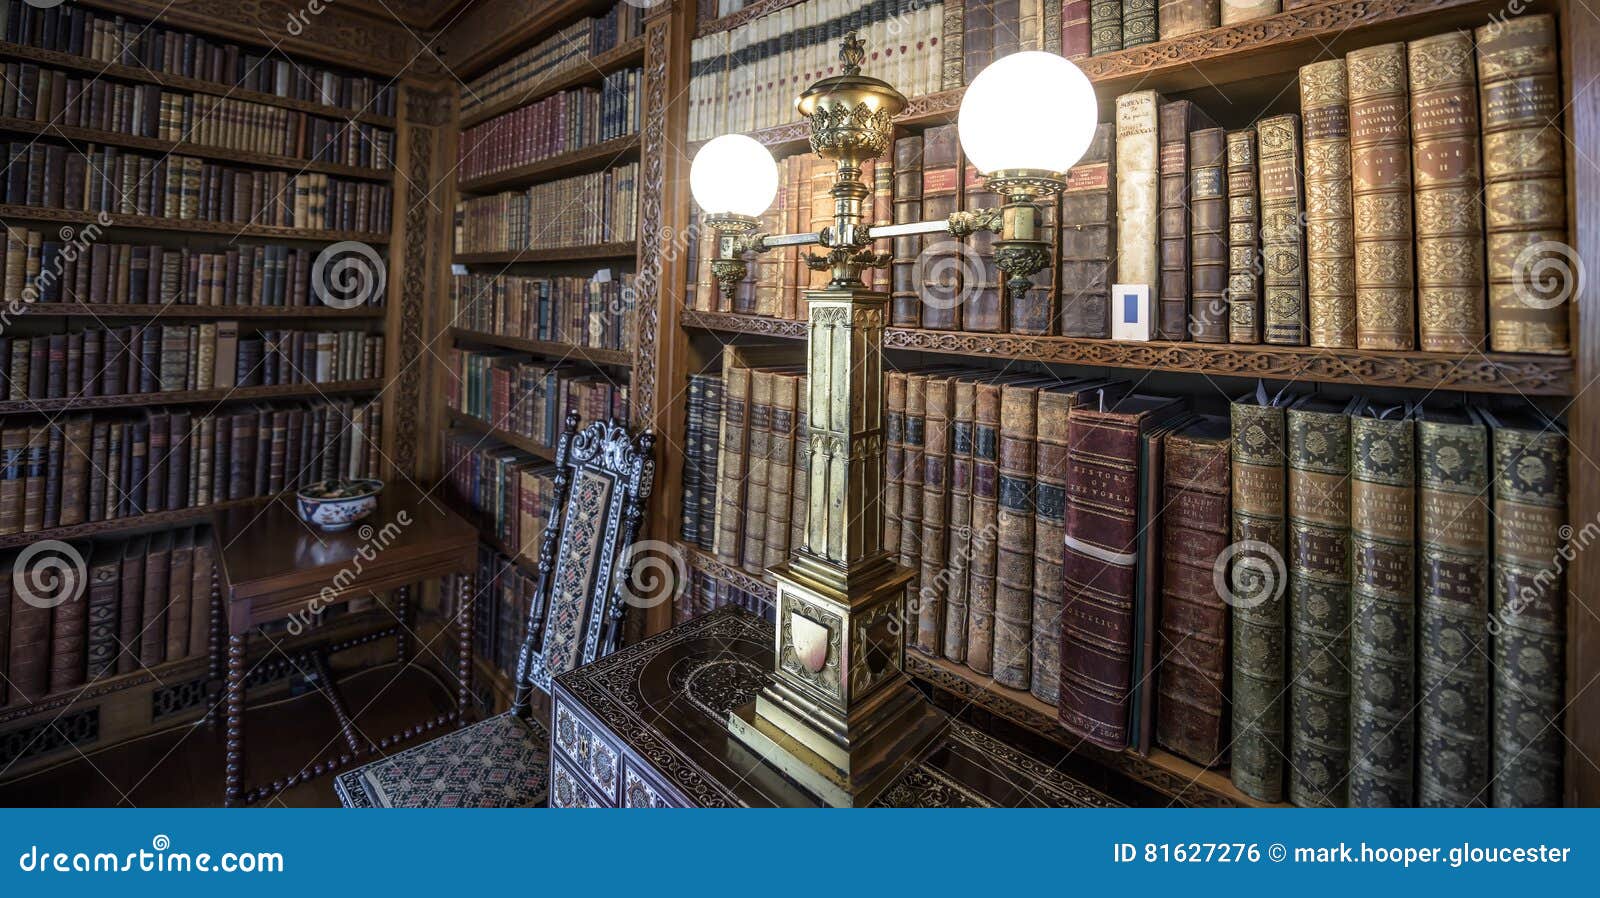 Very Old Library 16th Century Bookshelves With Old Fashioned